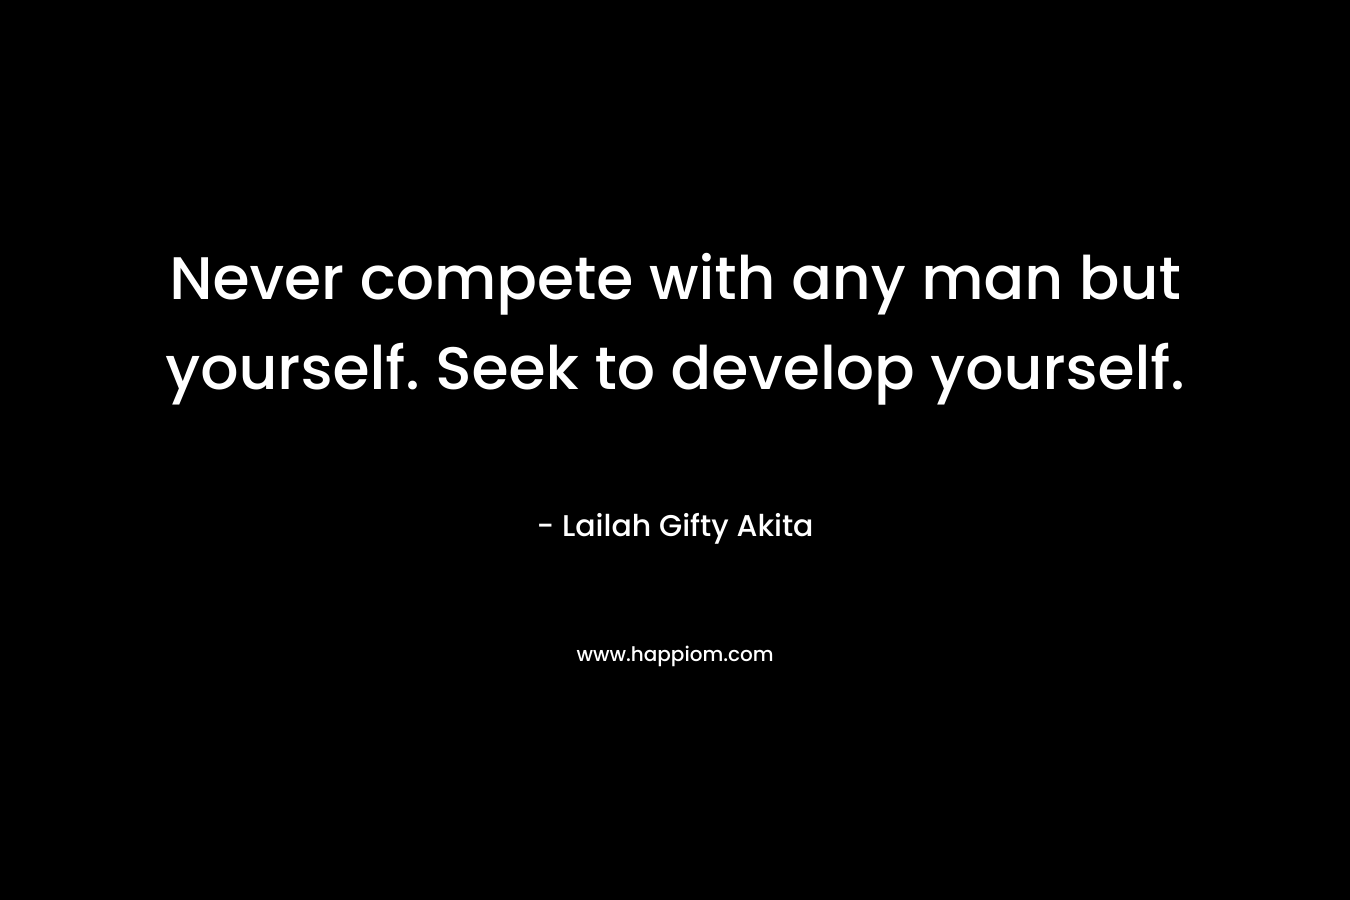 Never compete with any man but yourself. Seek to develop yourself.